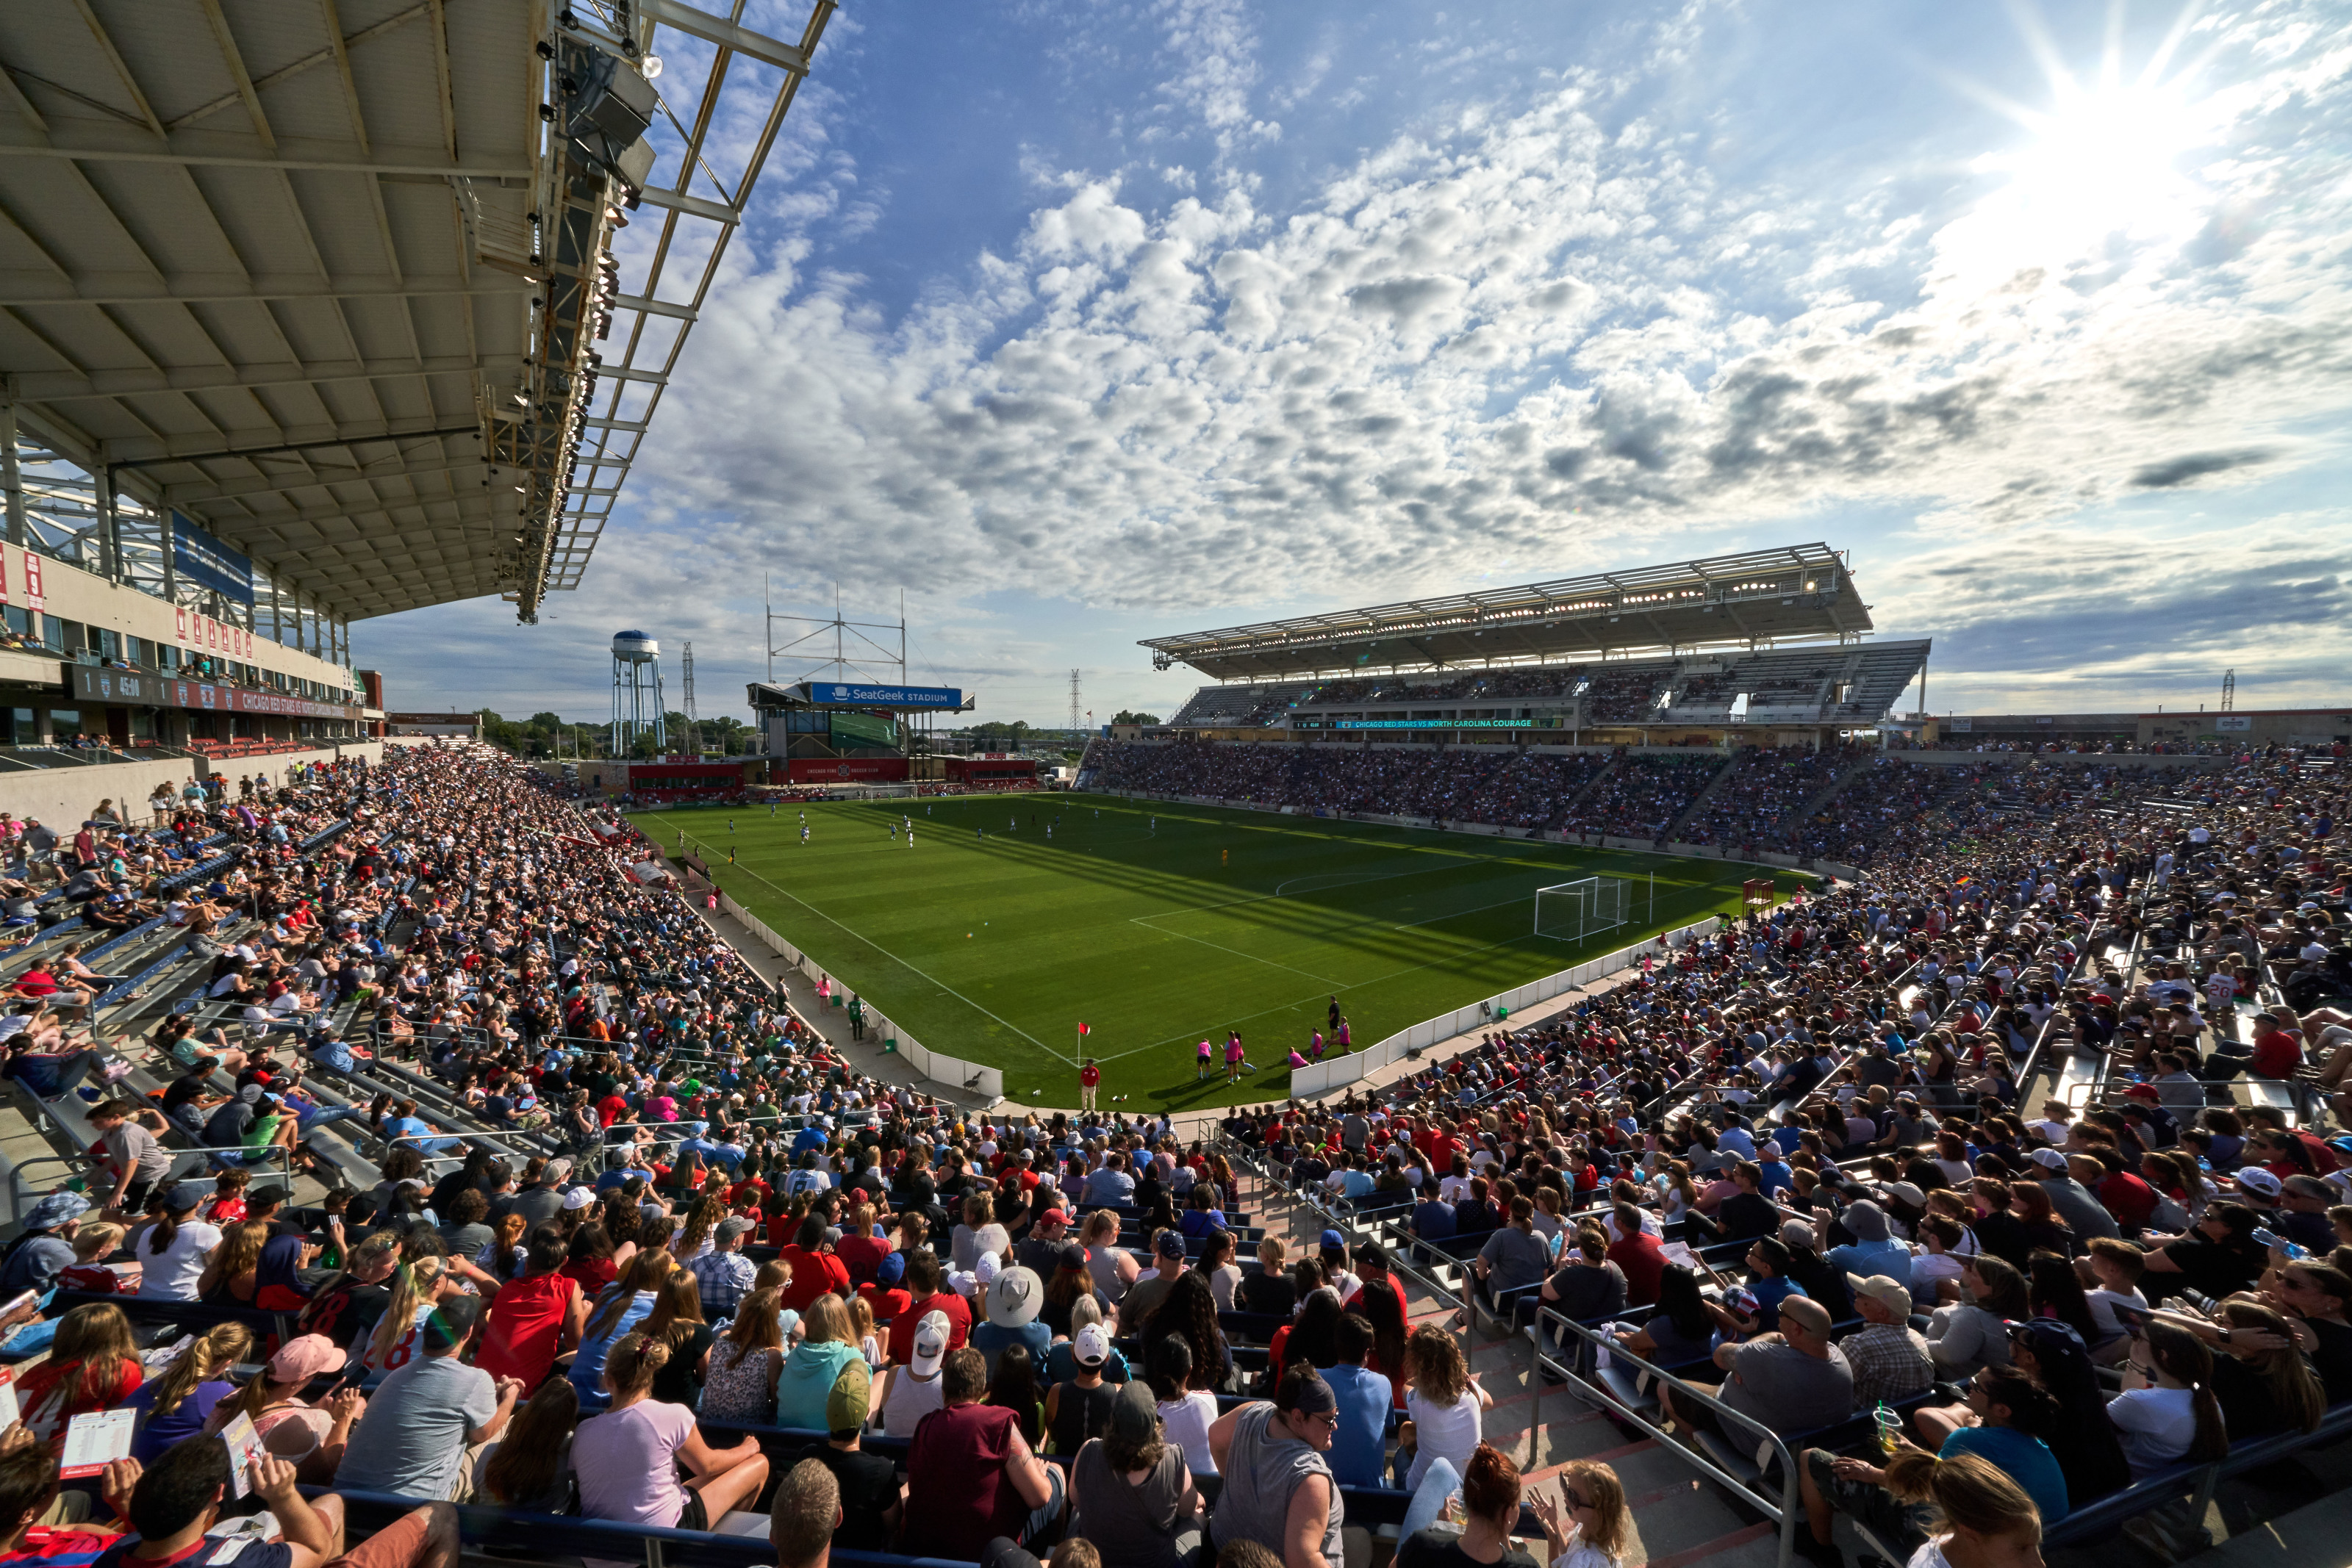 Chicago Fire: A tale of two stadiums